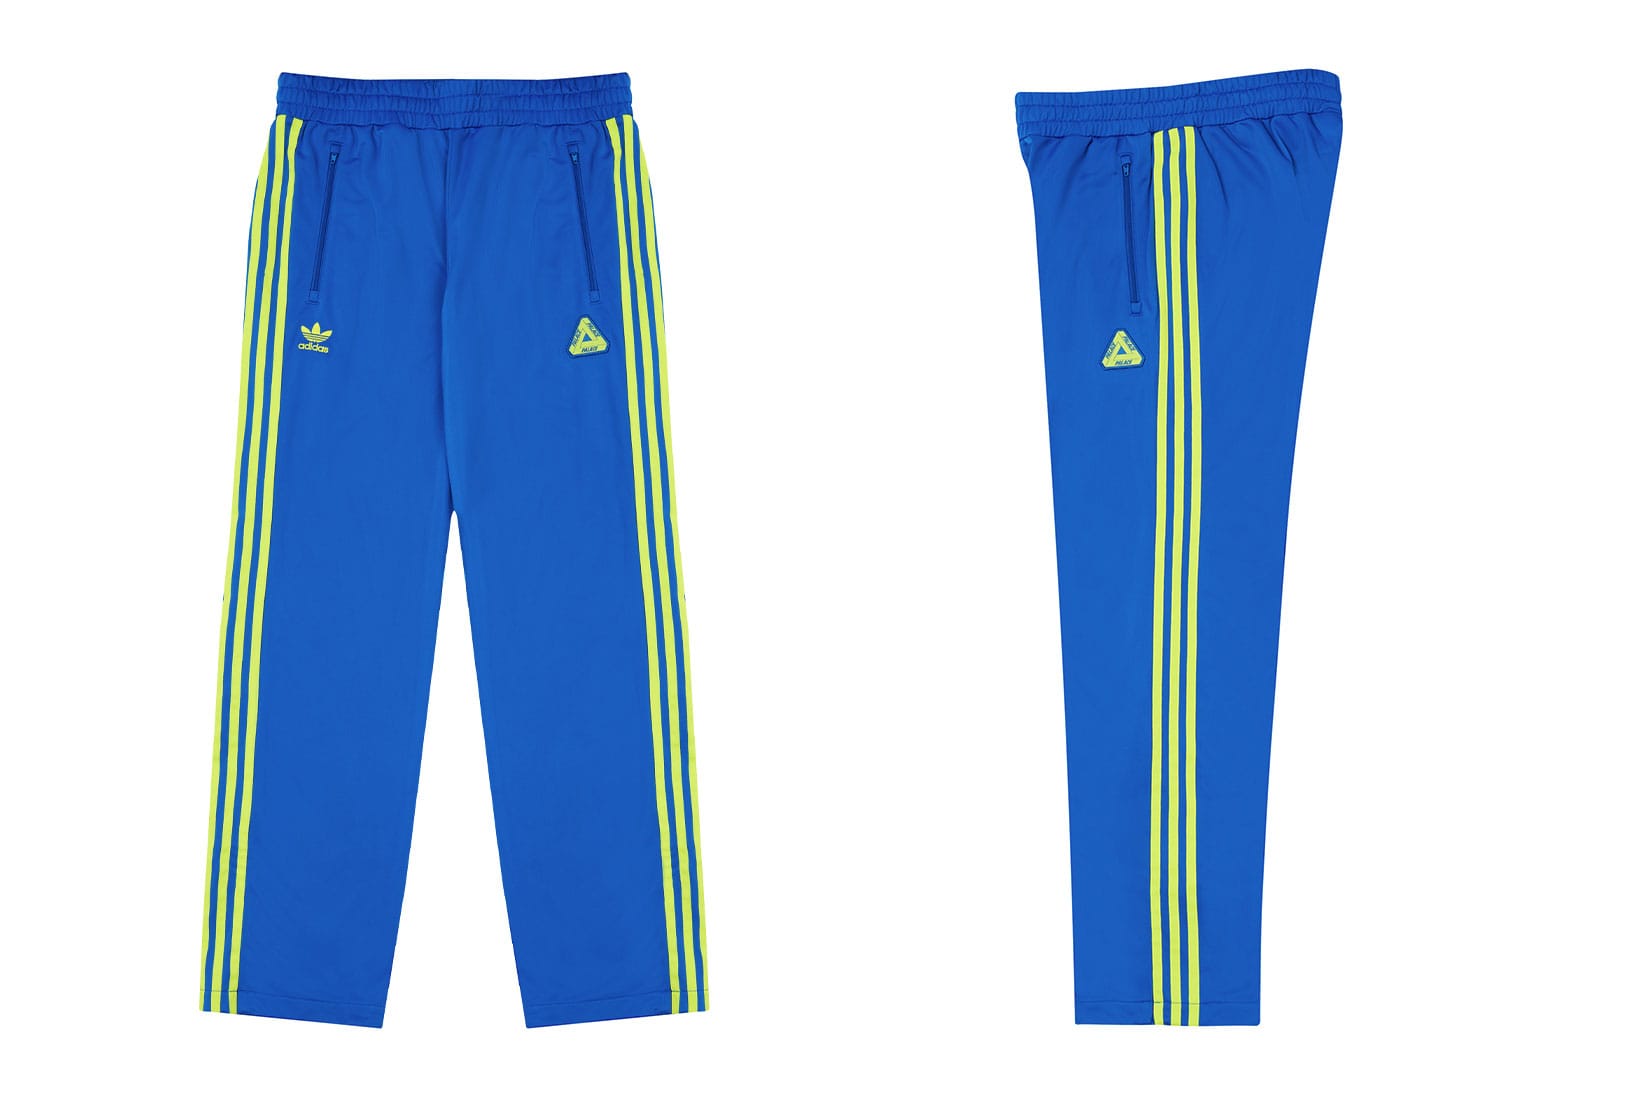 yellow and blue adidas tracksuit